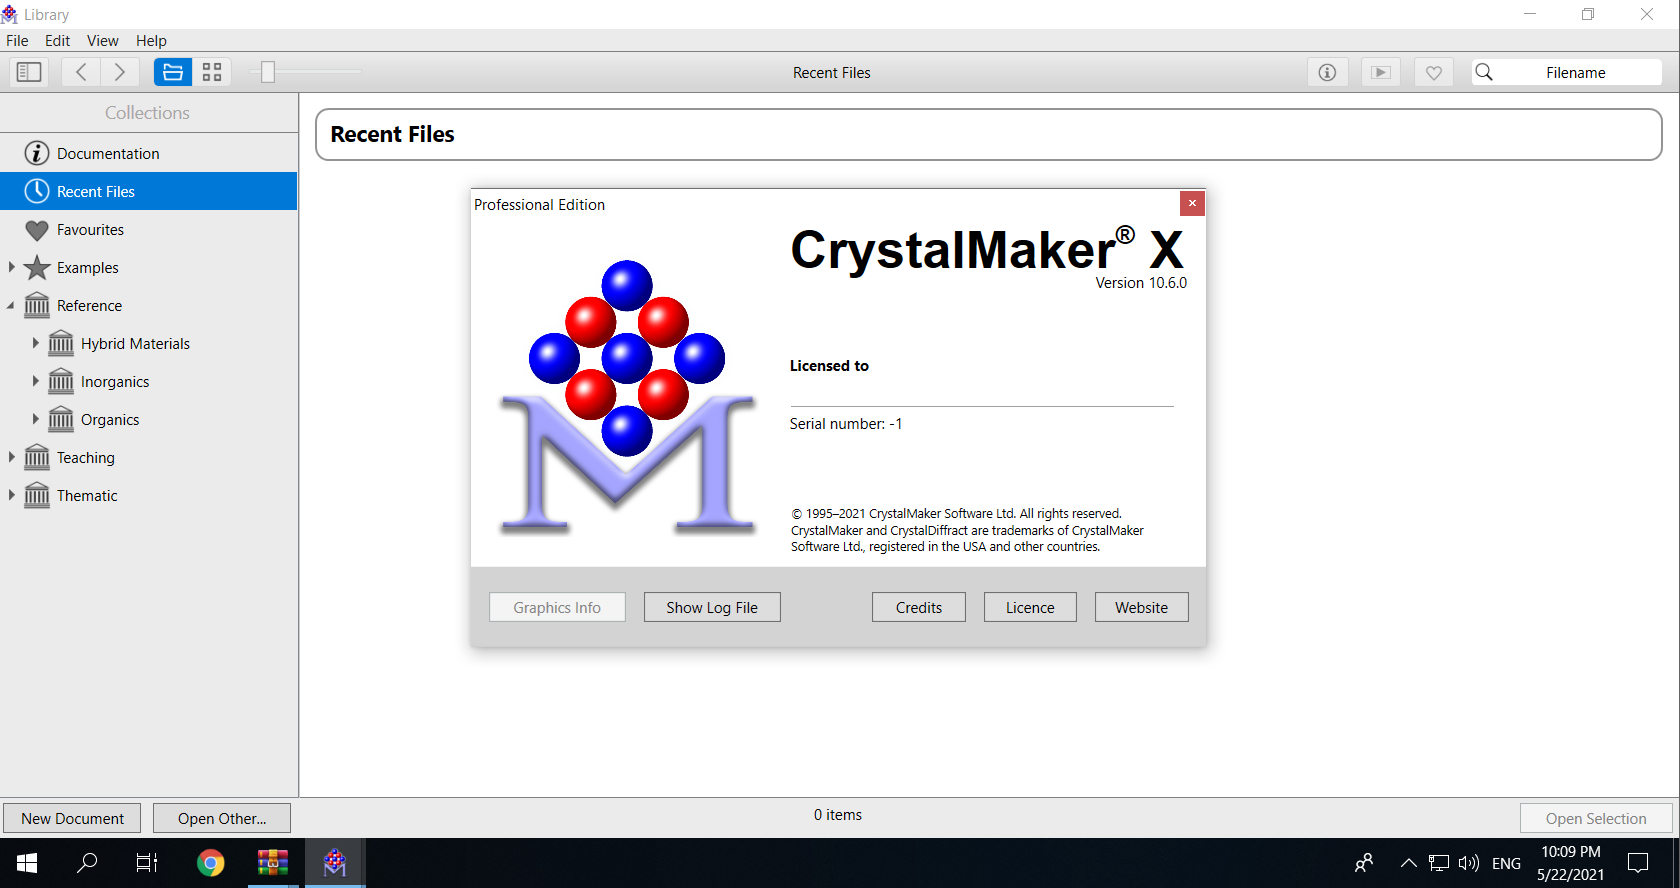 Working with CrystalMaker 10.60 full license